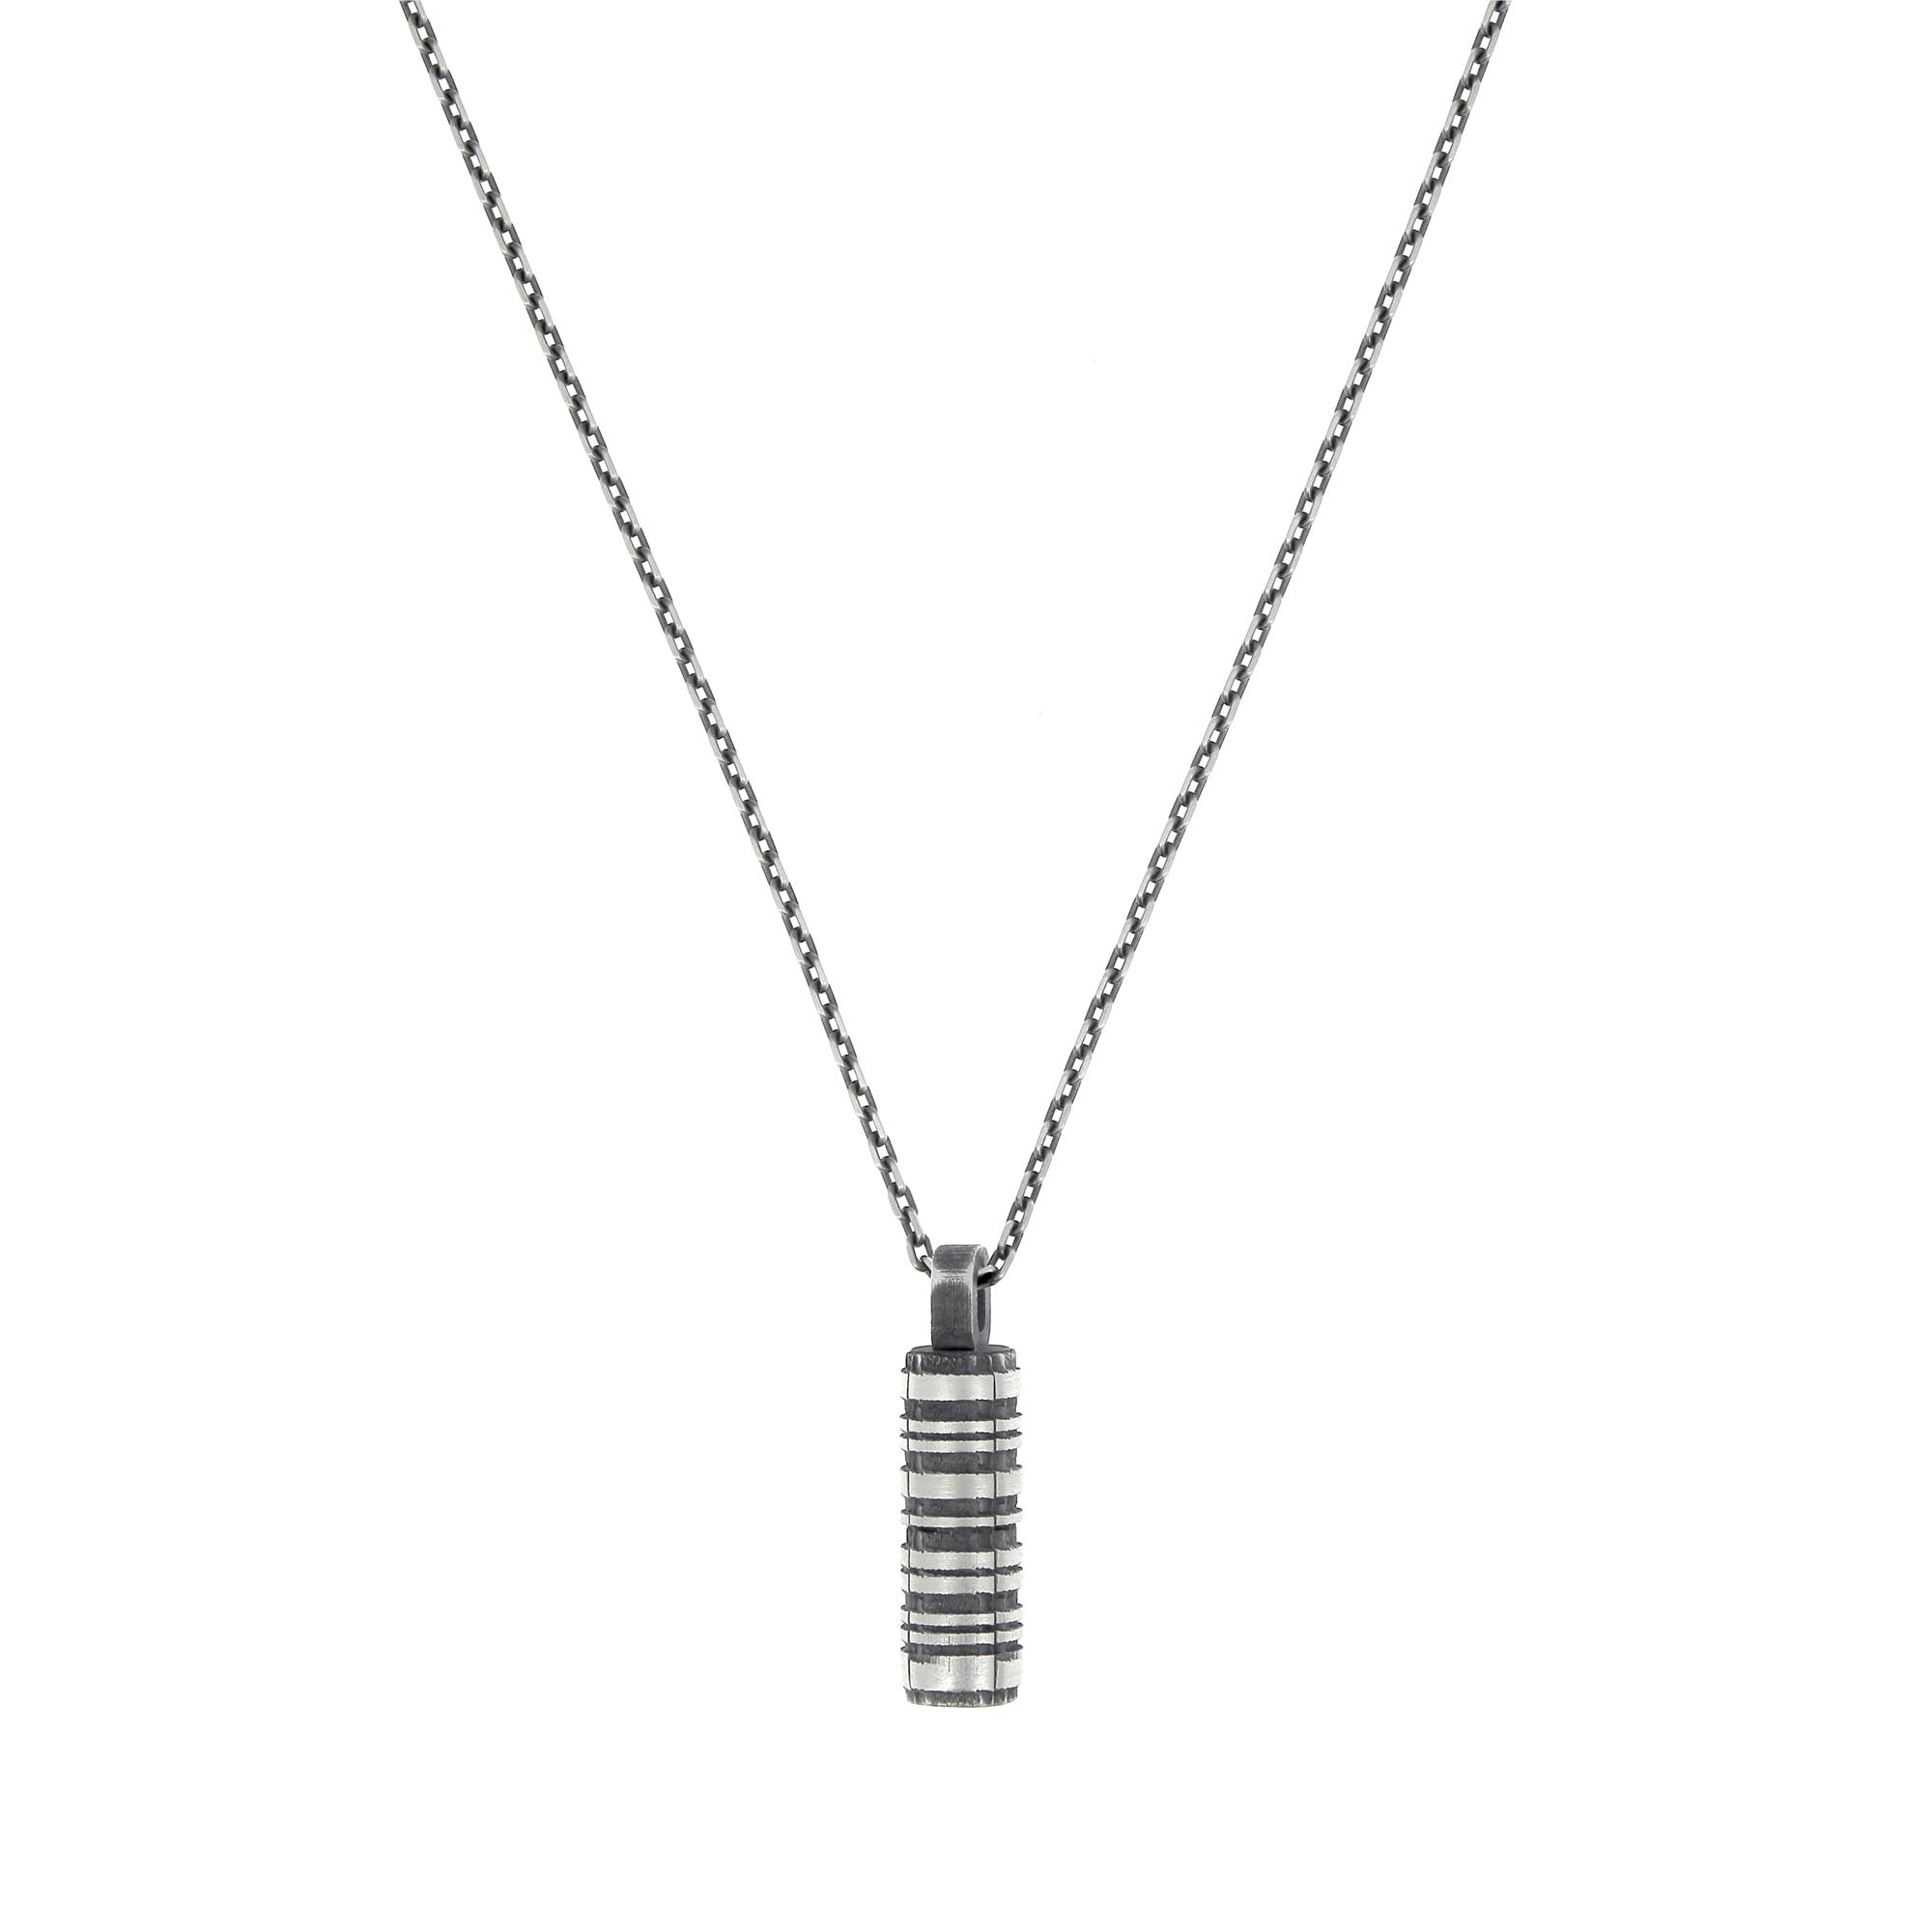 SIK-022 Necklace